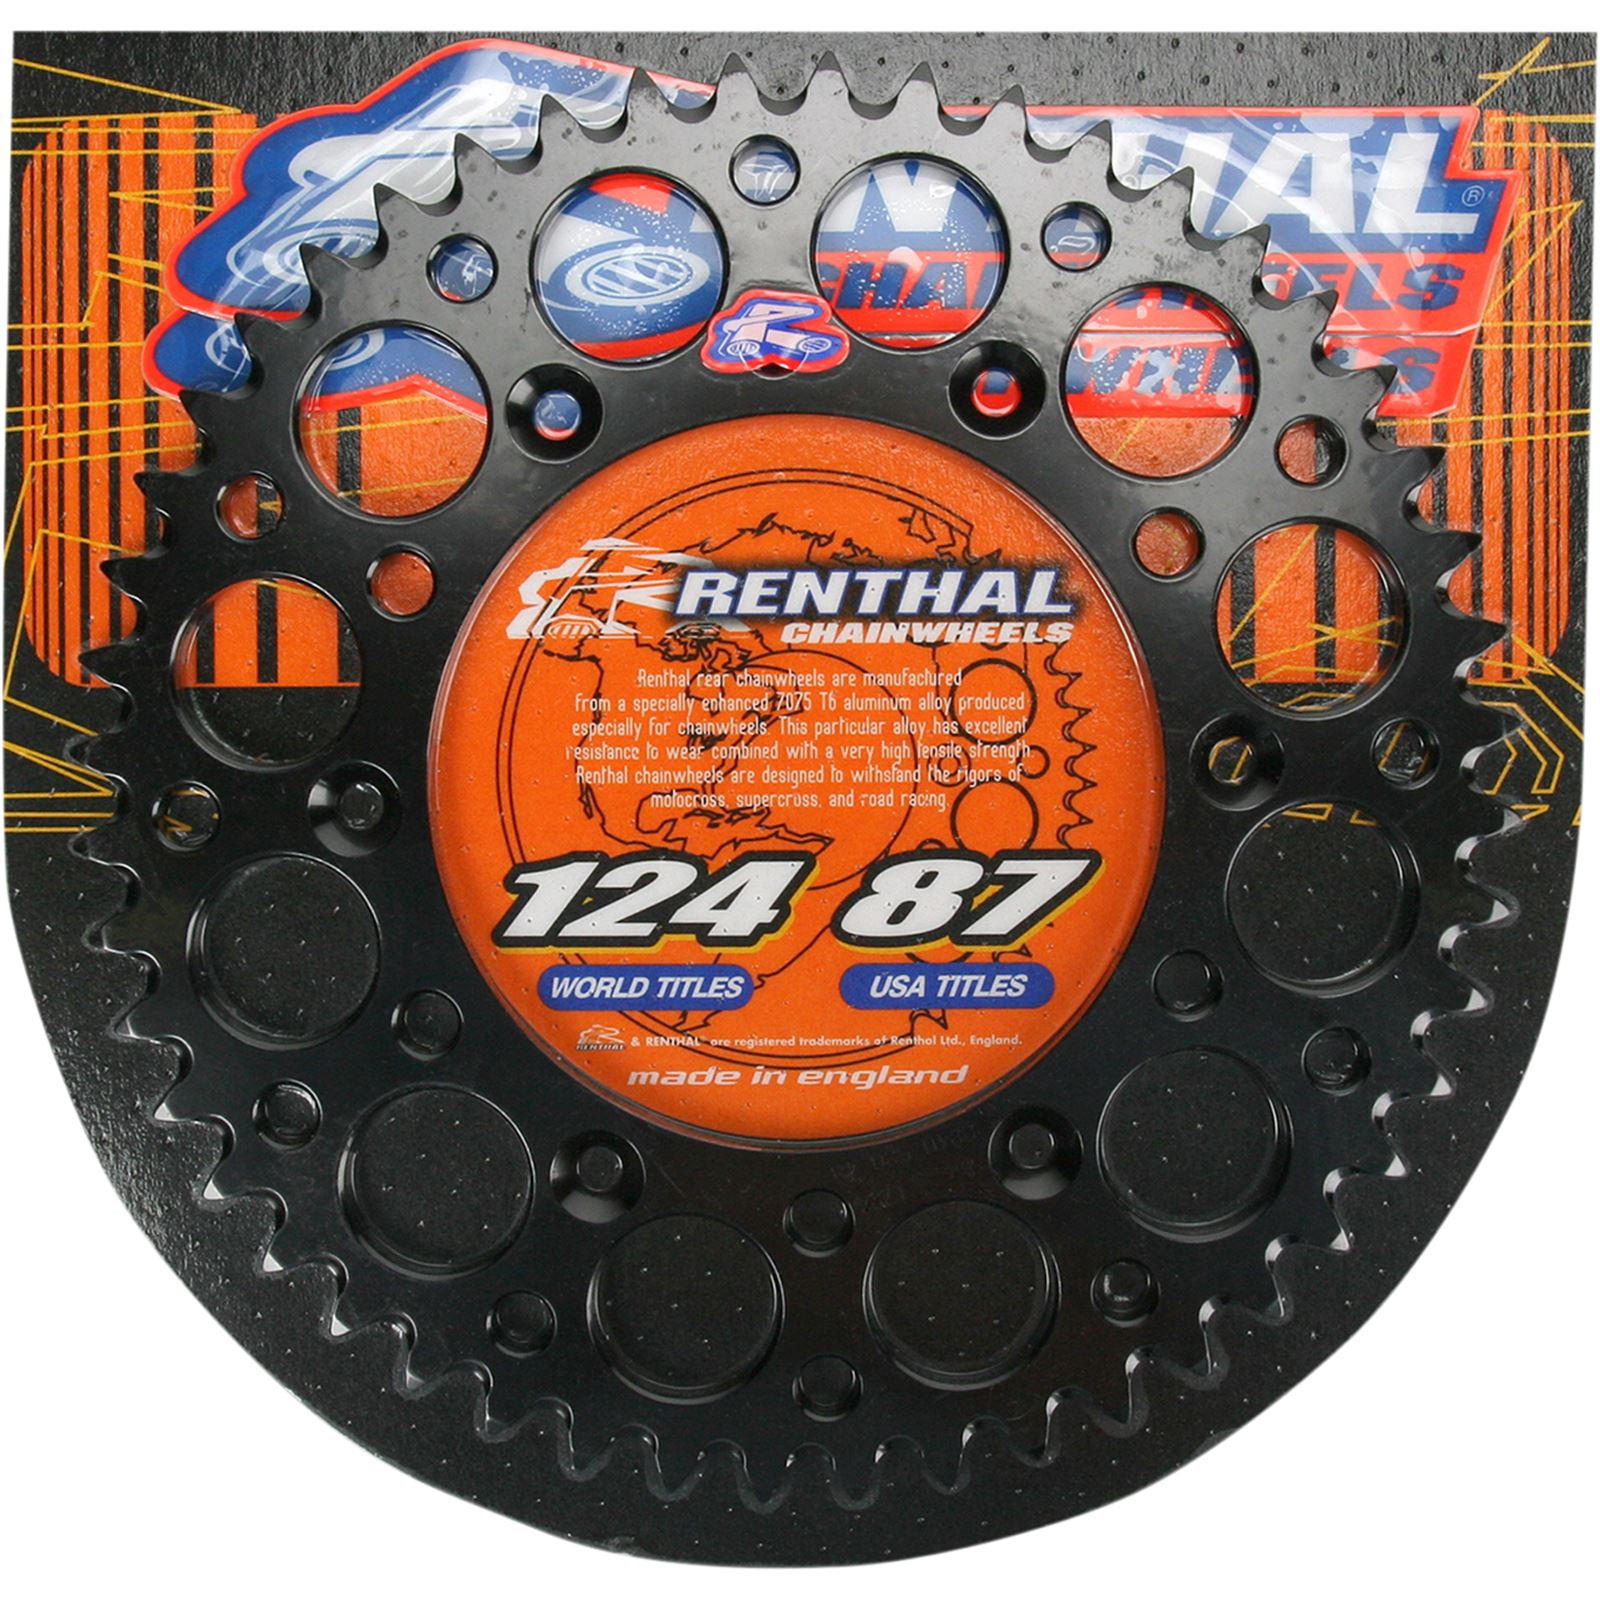 Renthal Sprocket - KTM - Black - 50-Tooth is at Motomentum at a